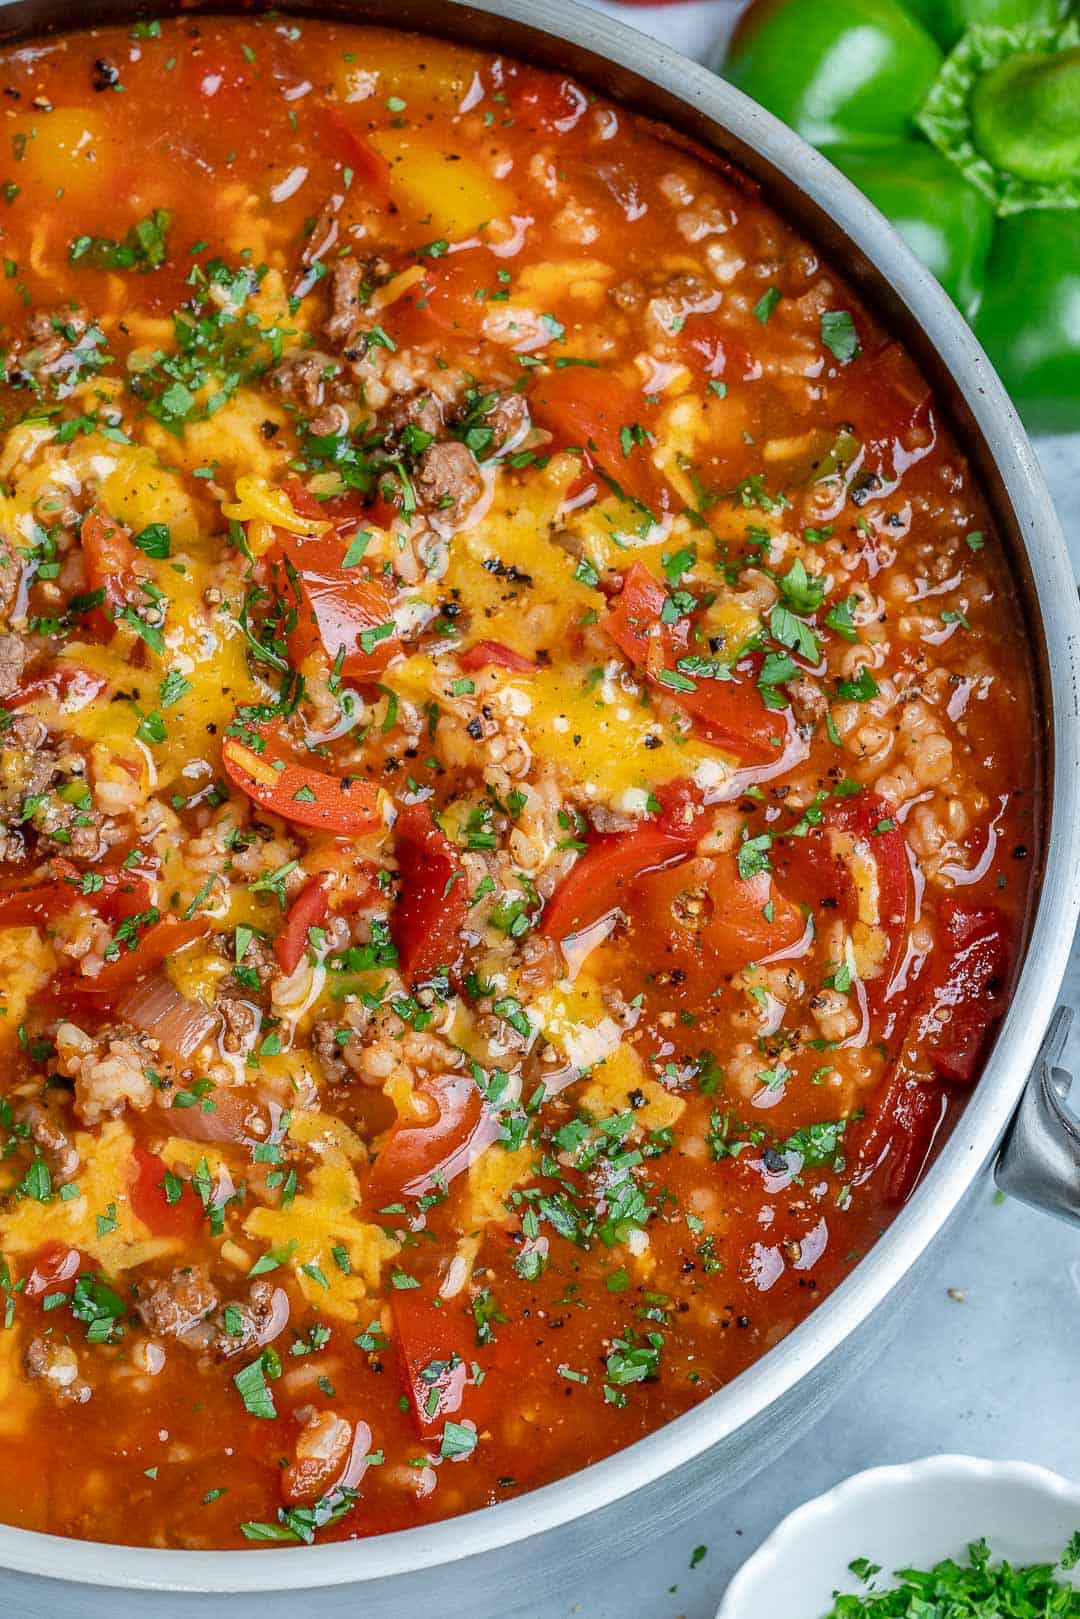 easy stuffed pepper soup recipe on stovetop. Topped with cheese and fresh parsley